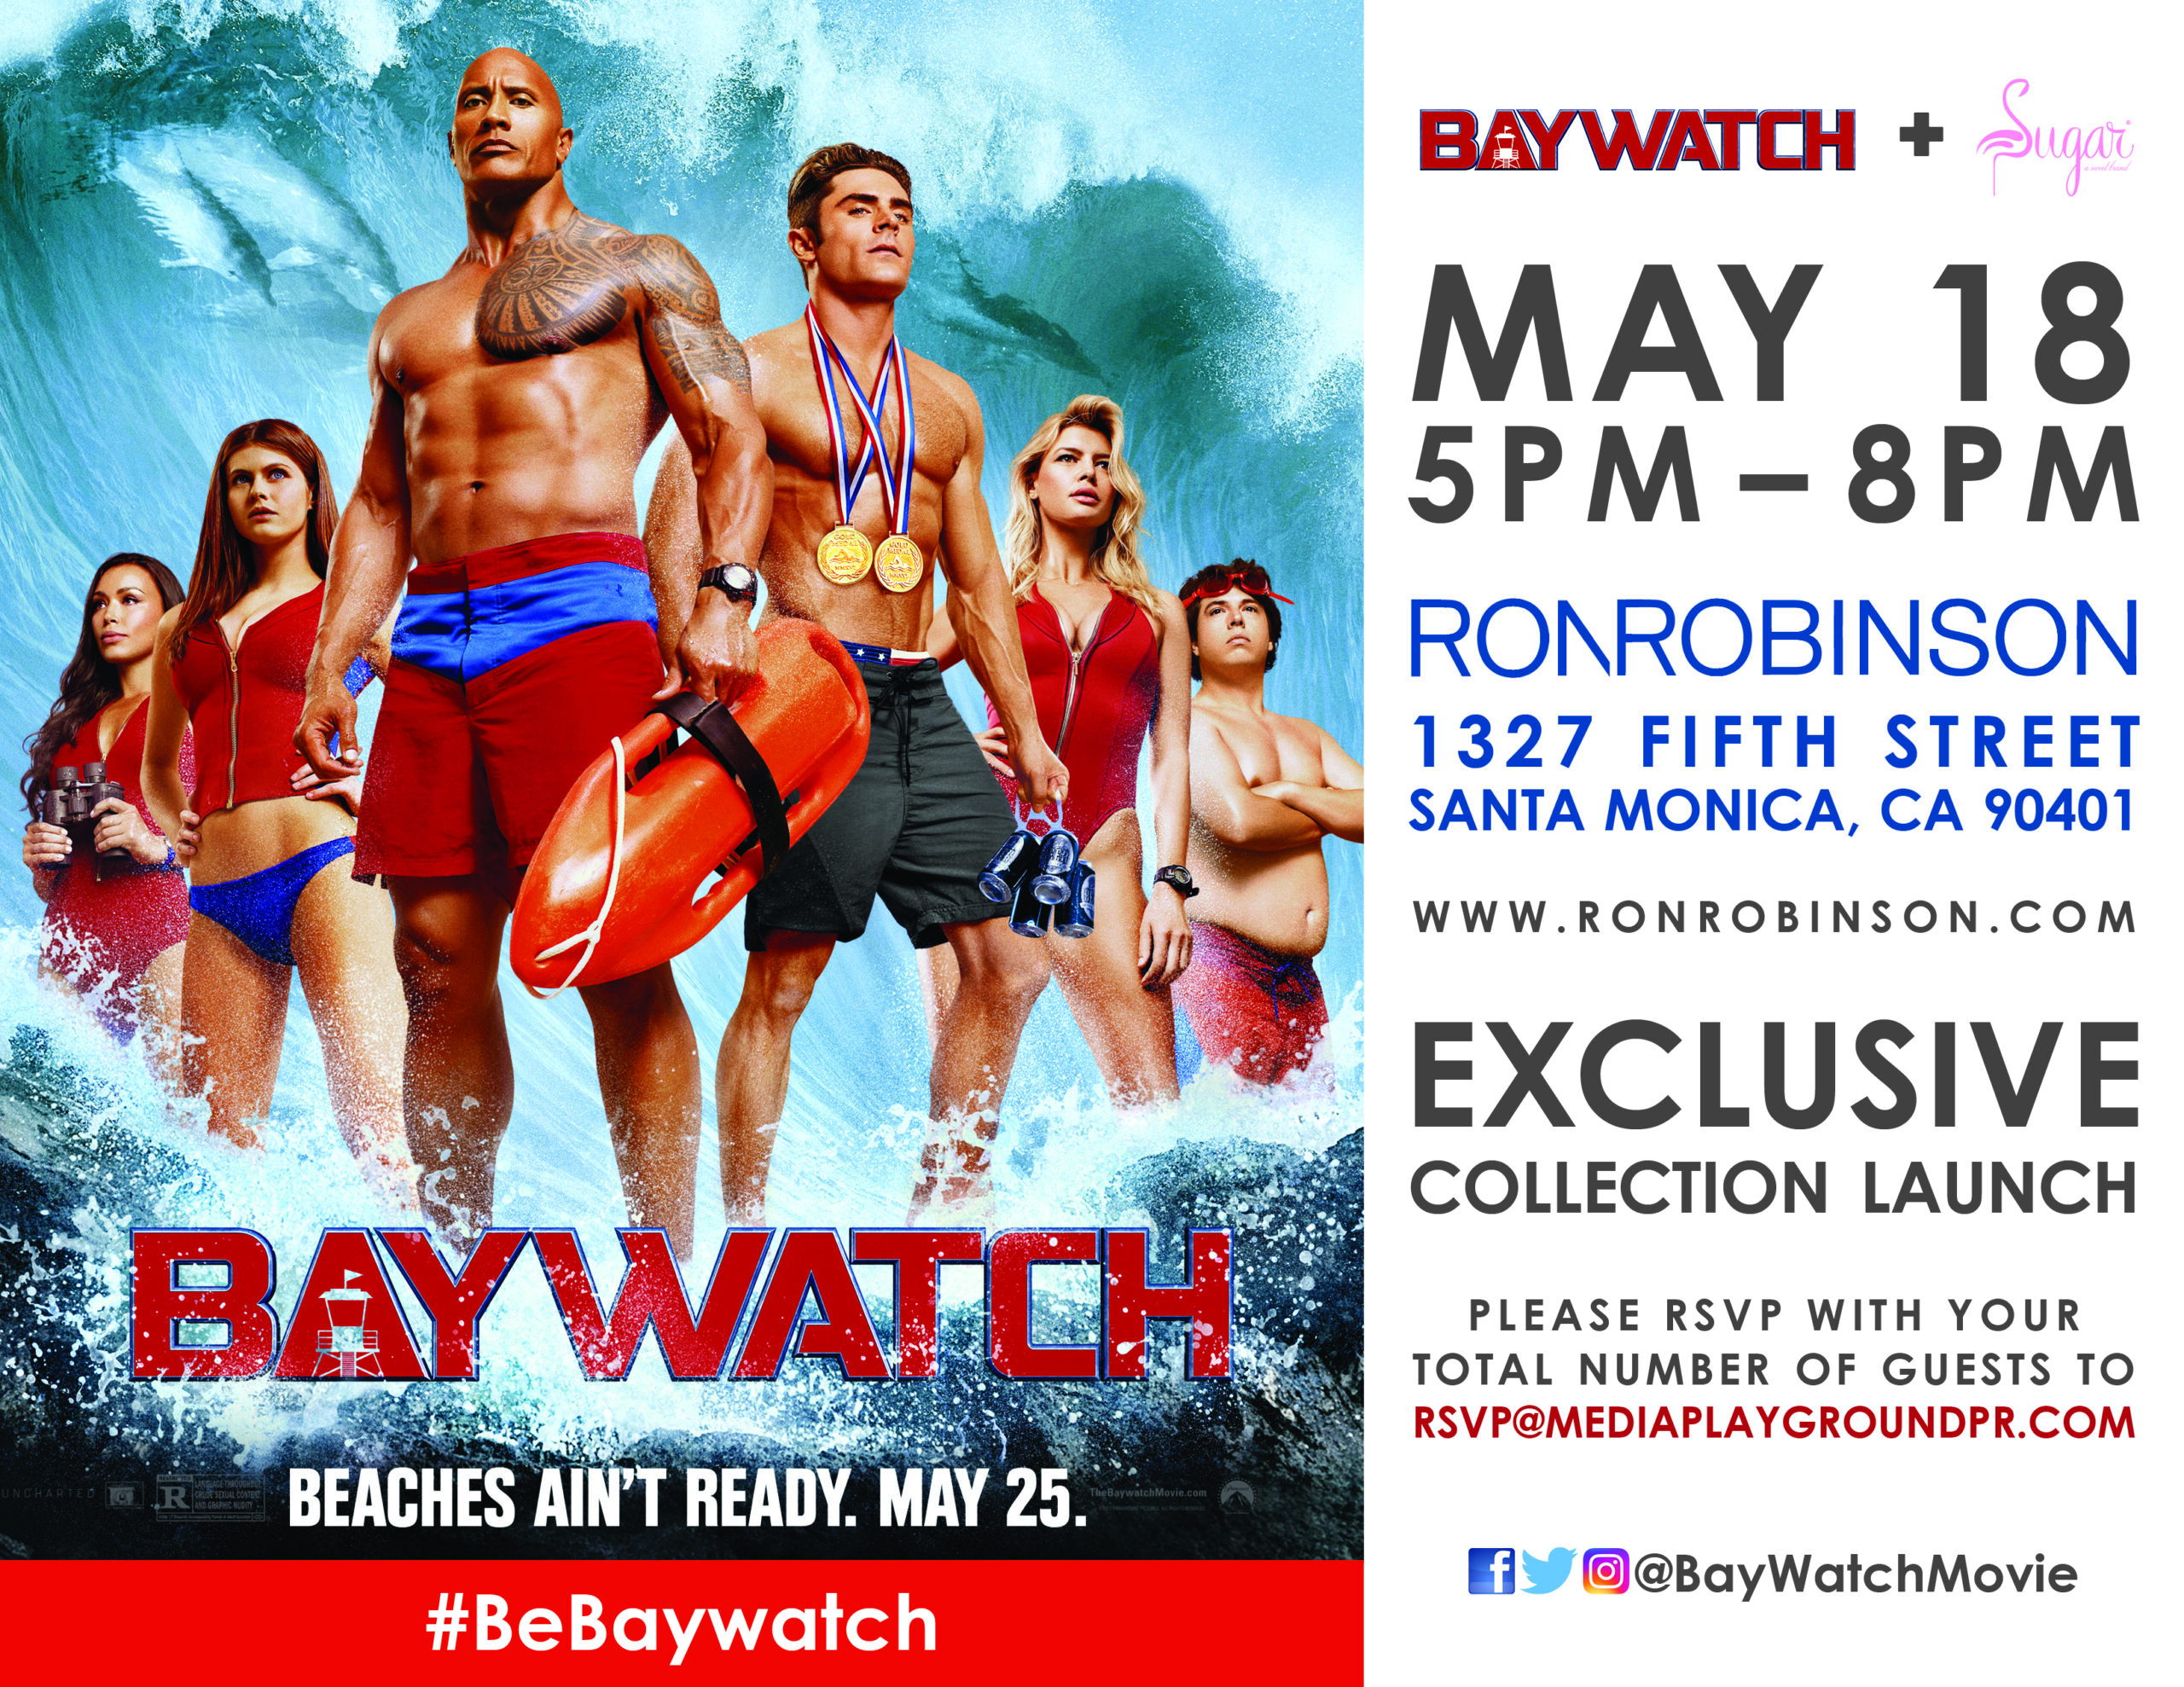 Baywatch & Sugar Clothing Launch Party at Ron Robinson